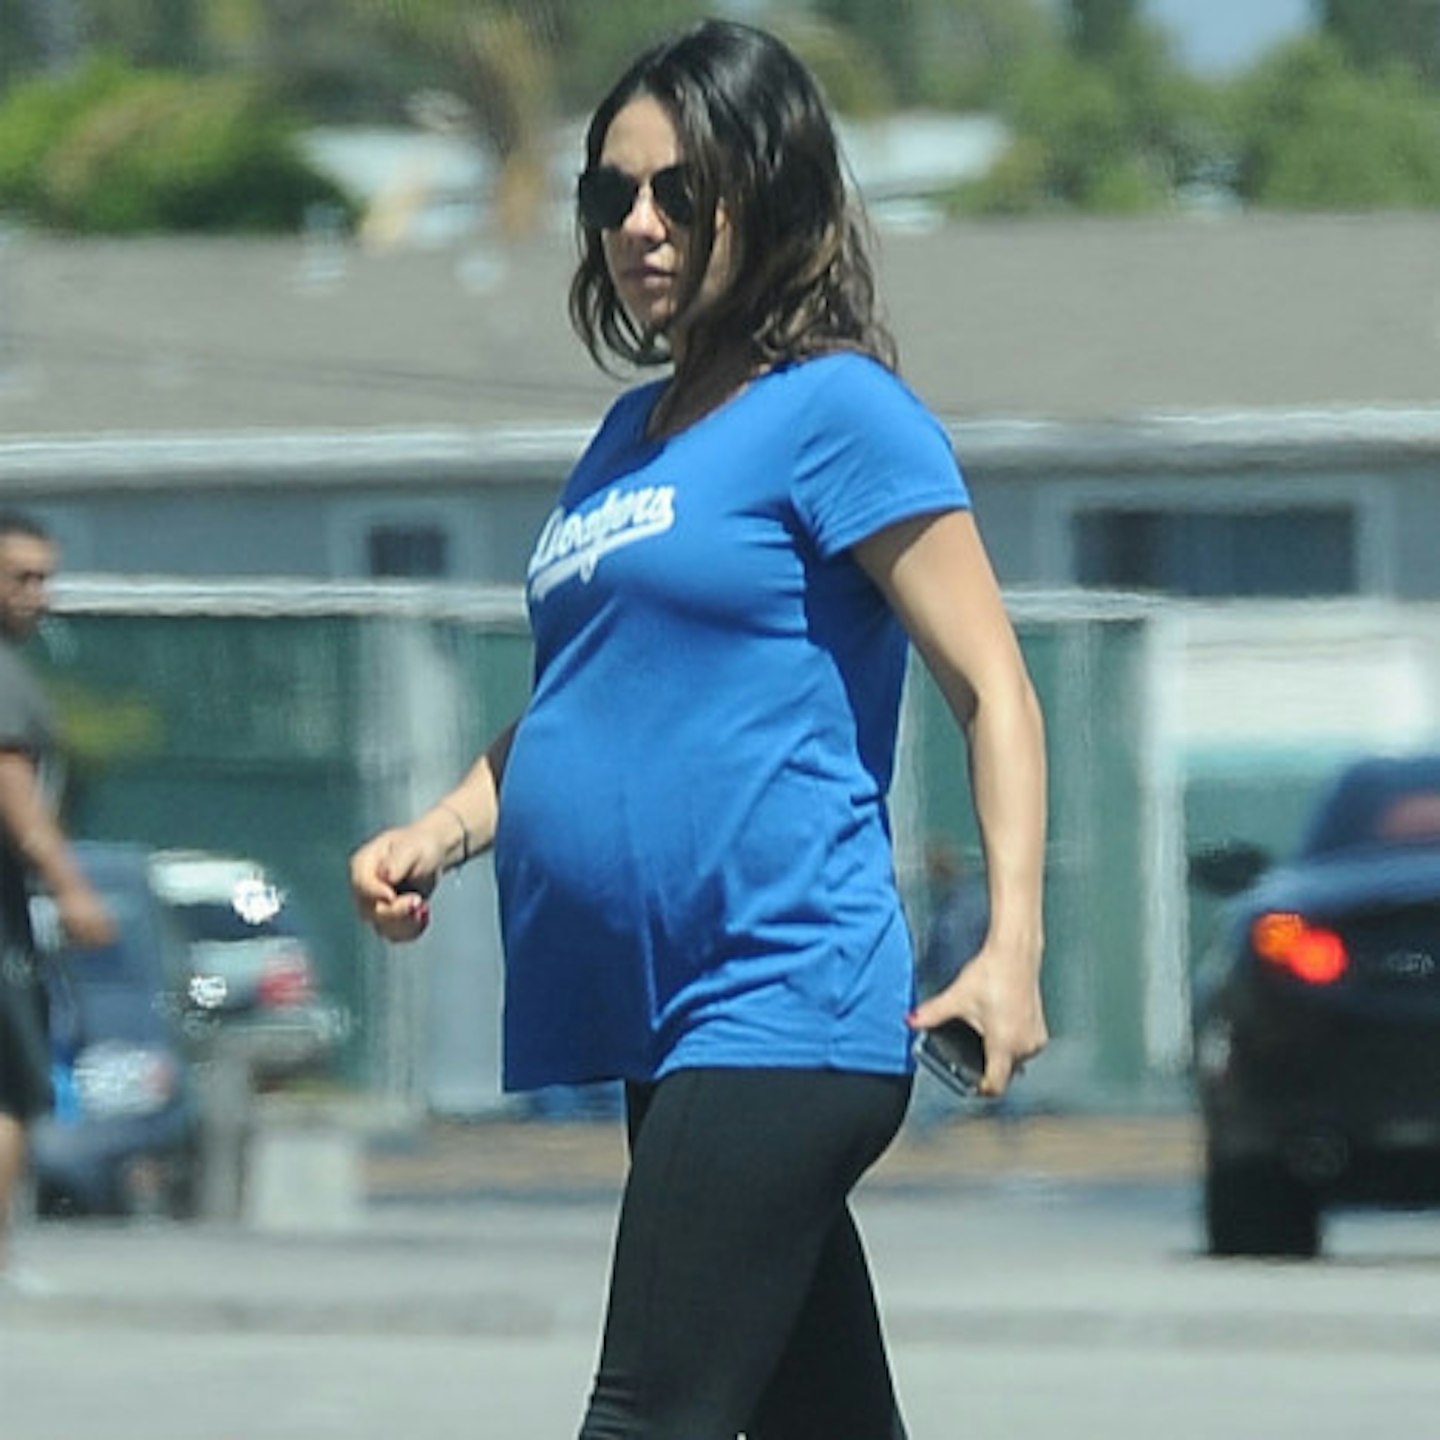 Mila is due 'any day now'